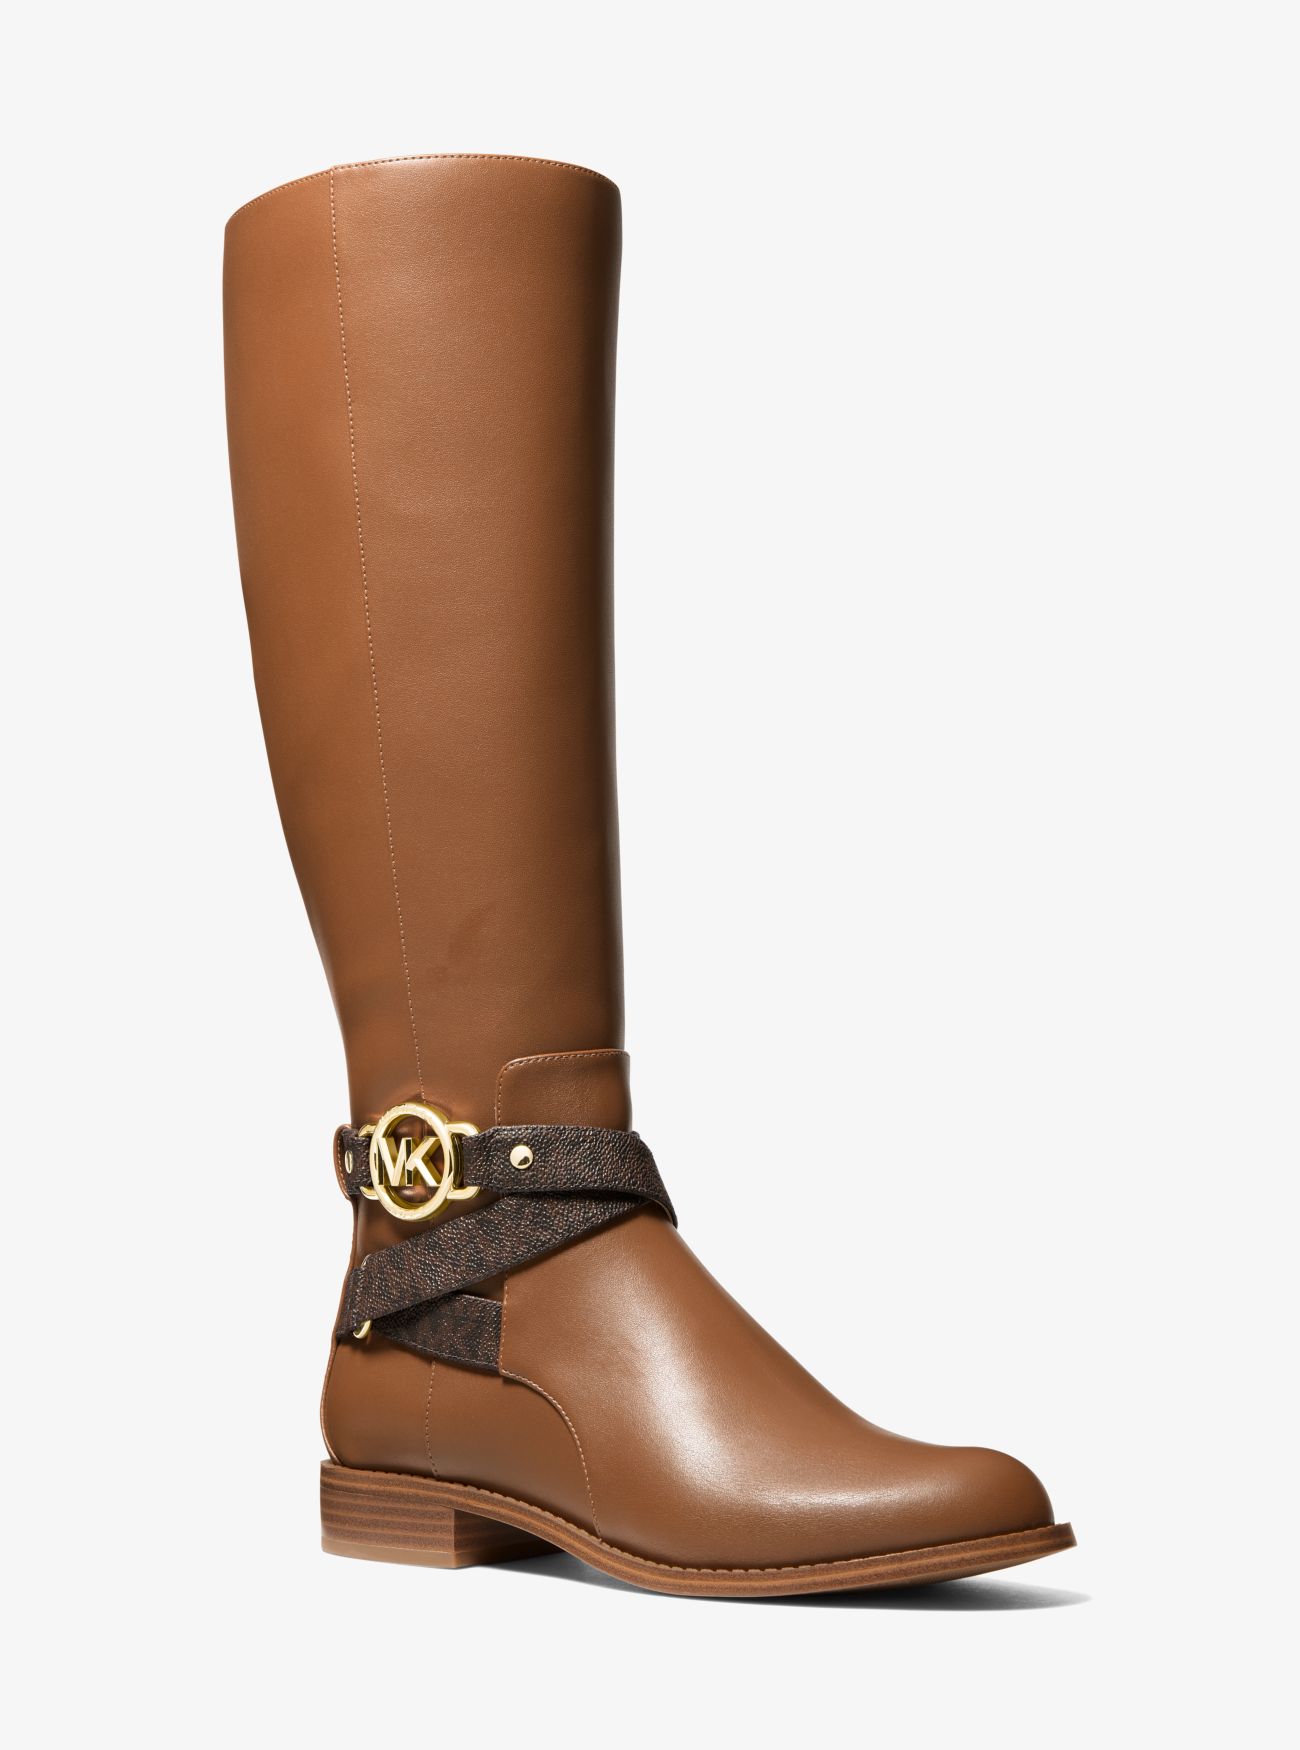 MK Rory Faux Leather and Logo Boot - Brown - Michael Kors